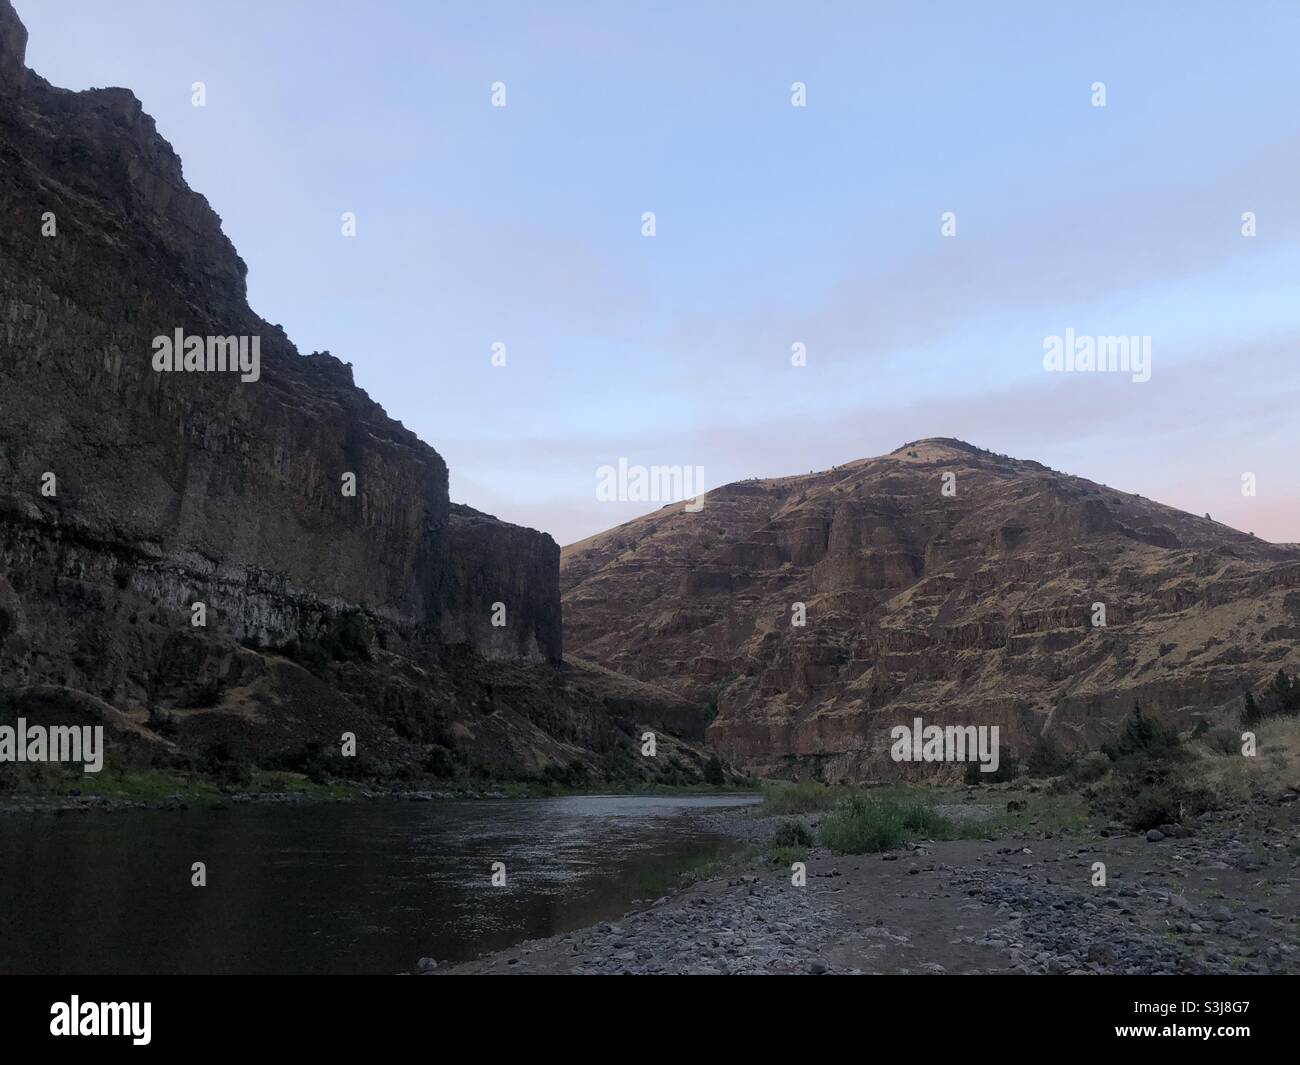 Cliffs along the John Day River in central Oregon. Stock Photo